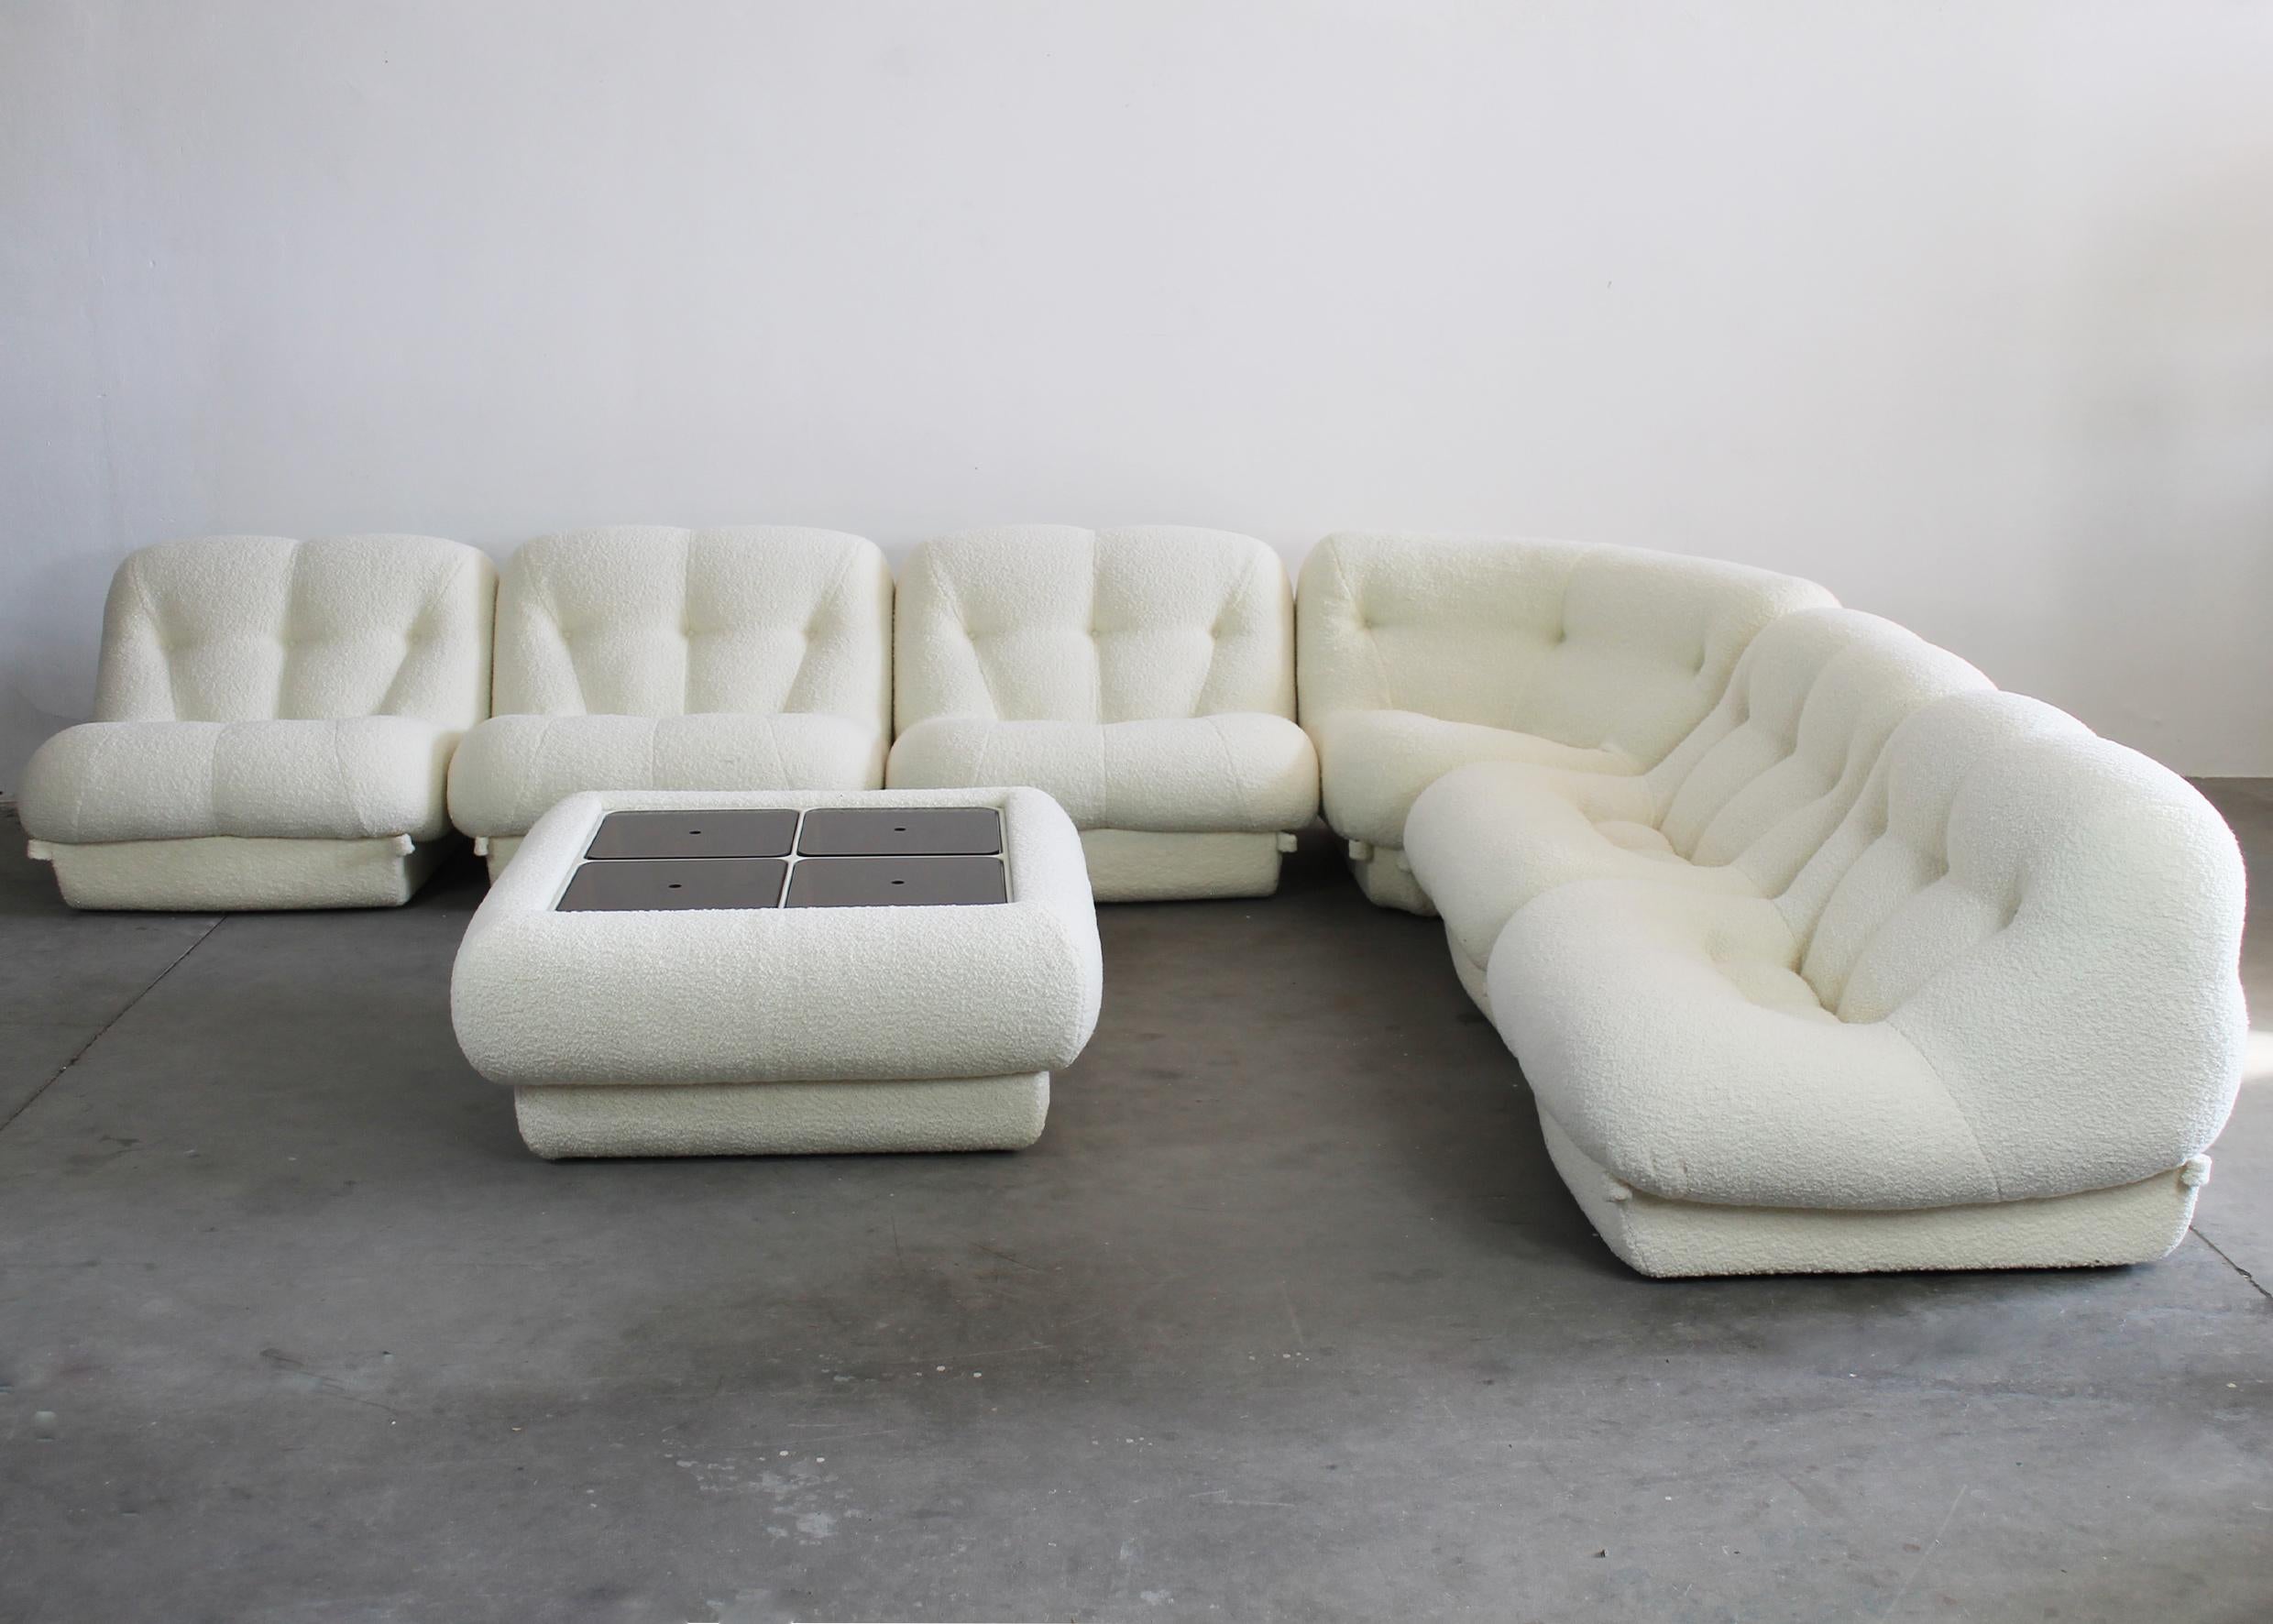 Italian Rino Maturi Nuvolone Living Room Set in White Boucle by MIMO Padova 1970s Italy For Sale